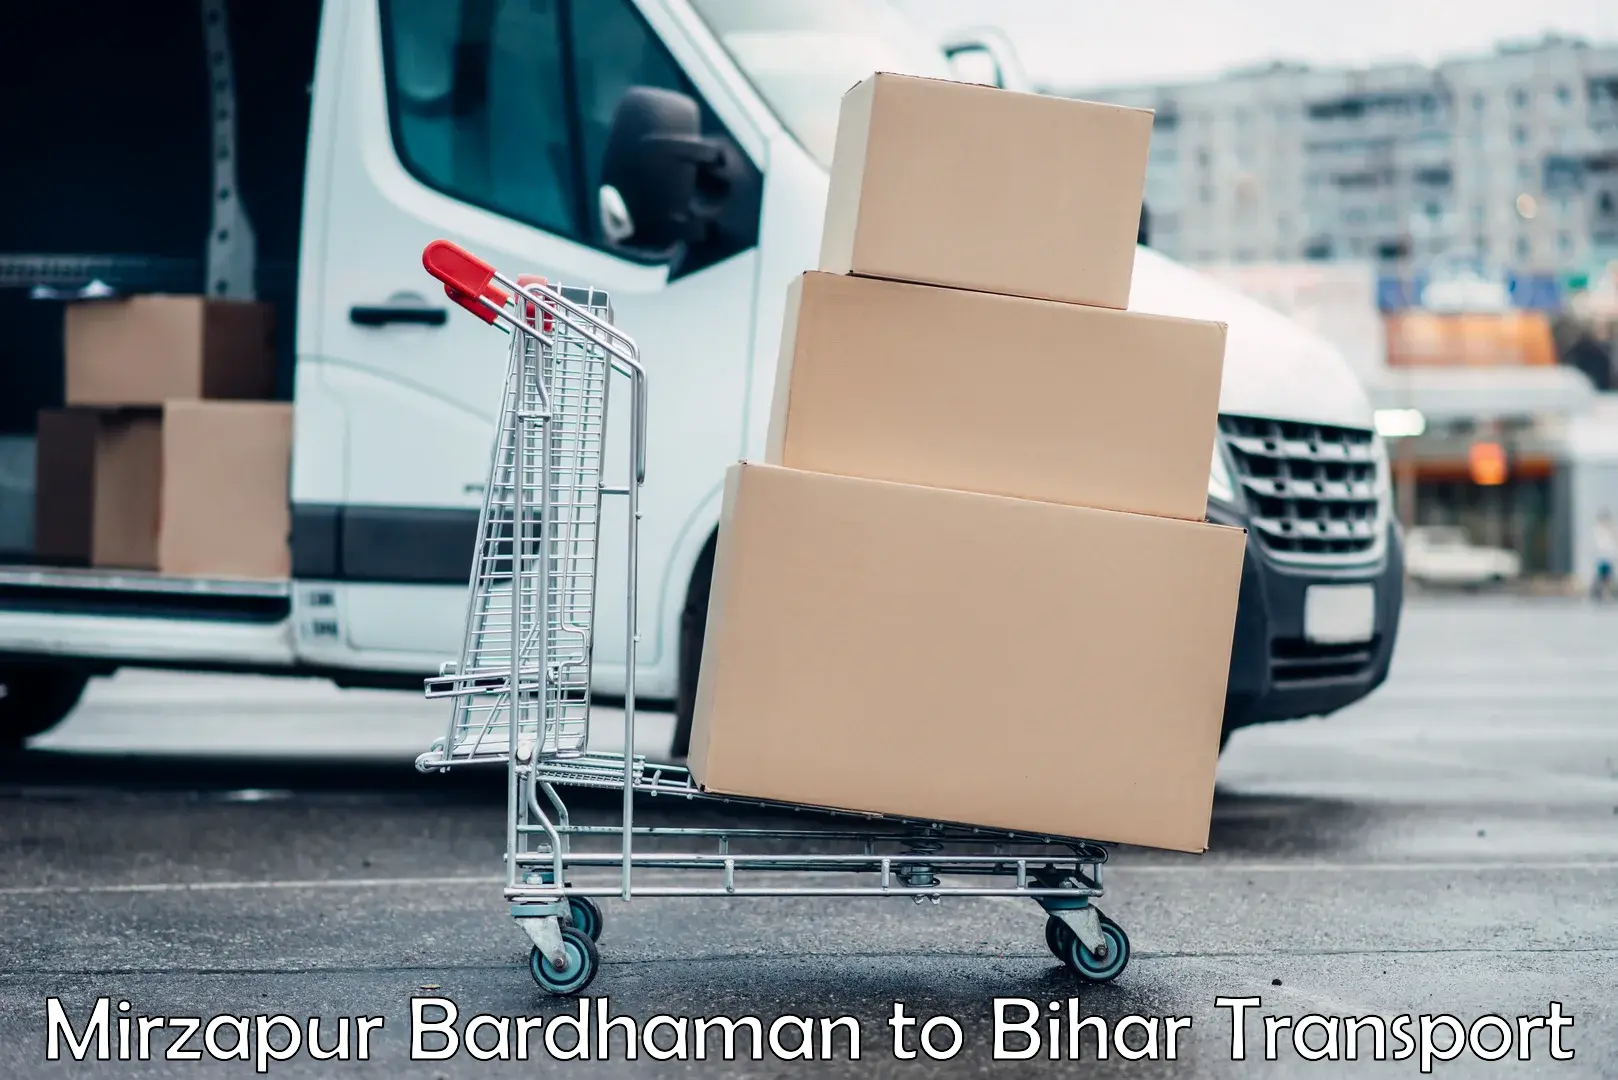 Best transport services in India Mirzapur Bardhaman to Fatwah